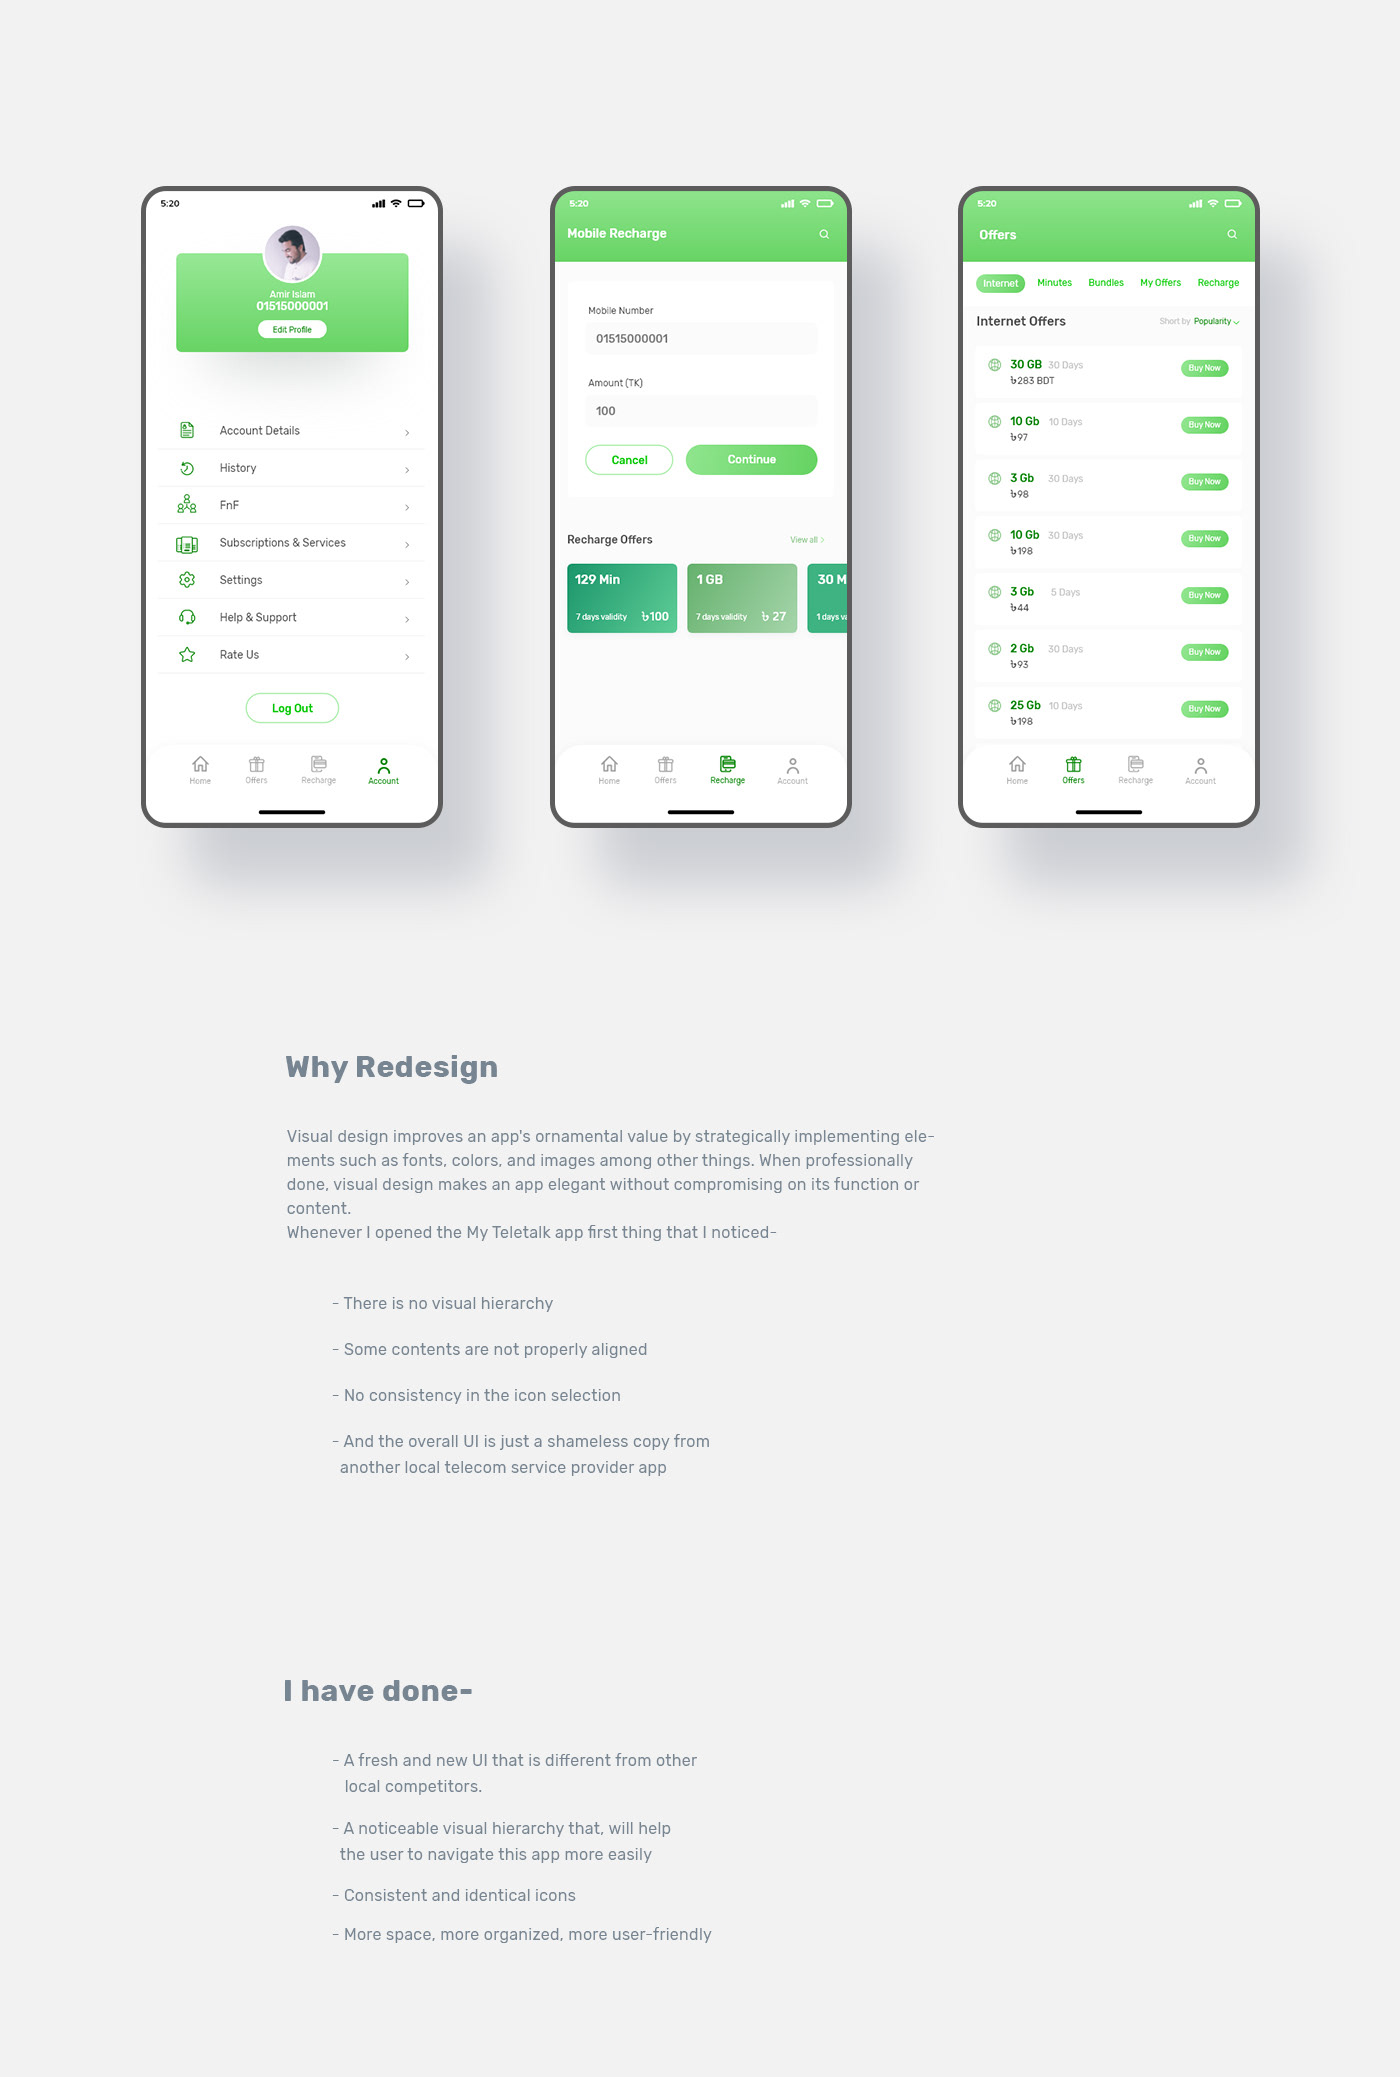 How to write a case study for mobile app redesign. this is an example of mobile app redesign.